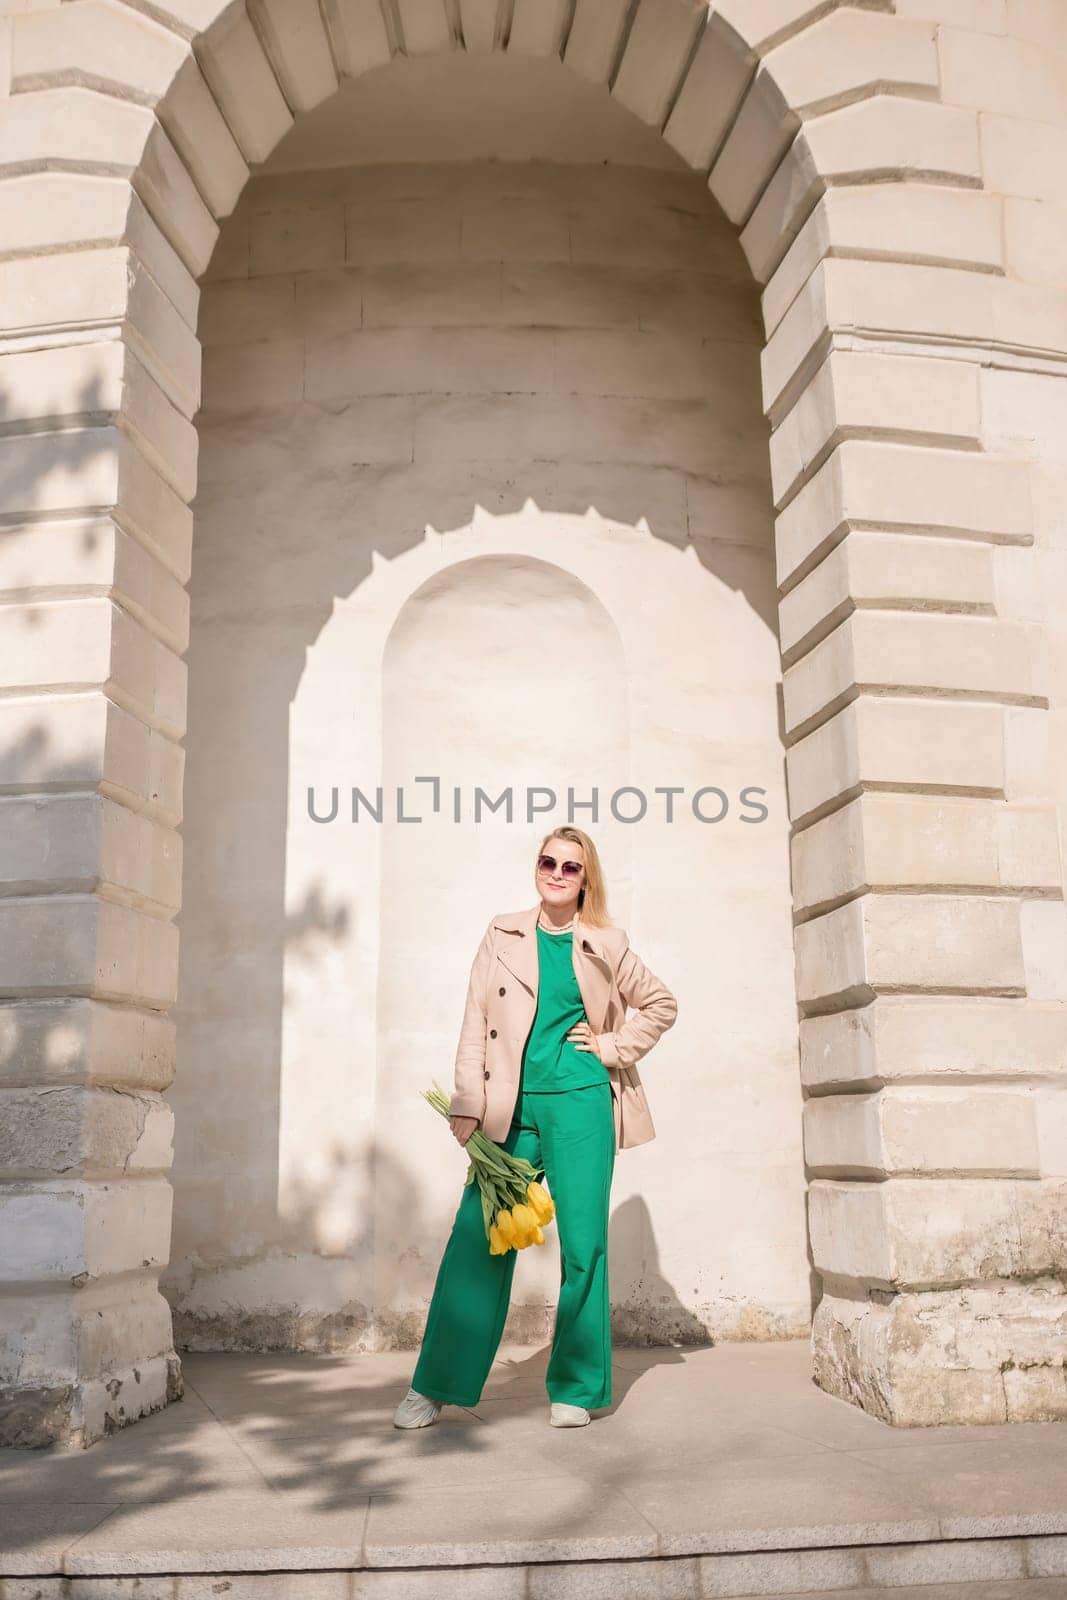 A woman is standing in front of a building with a yellow flower in her hand. She is wearing a green dress and a tan coat